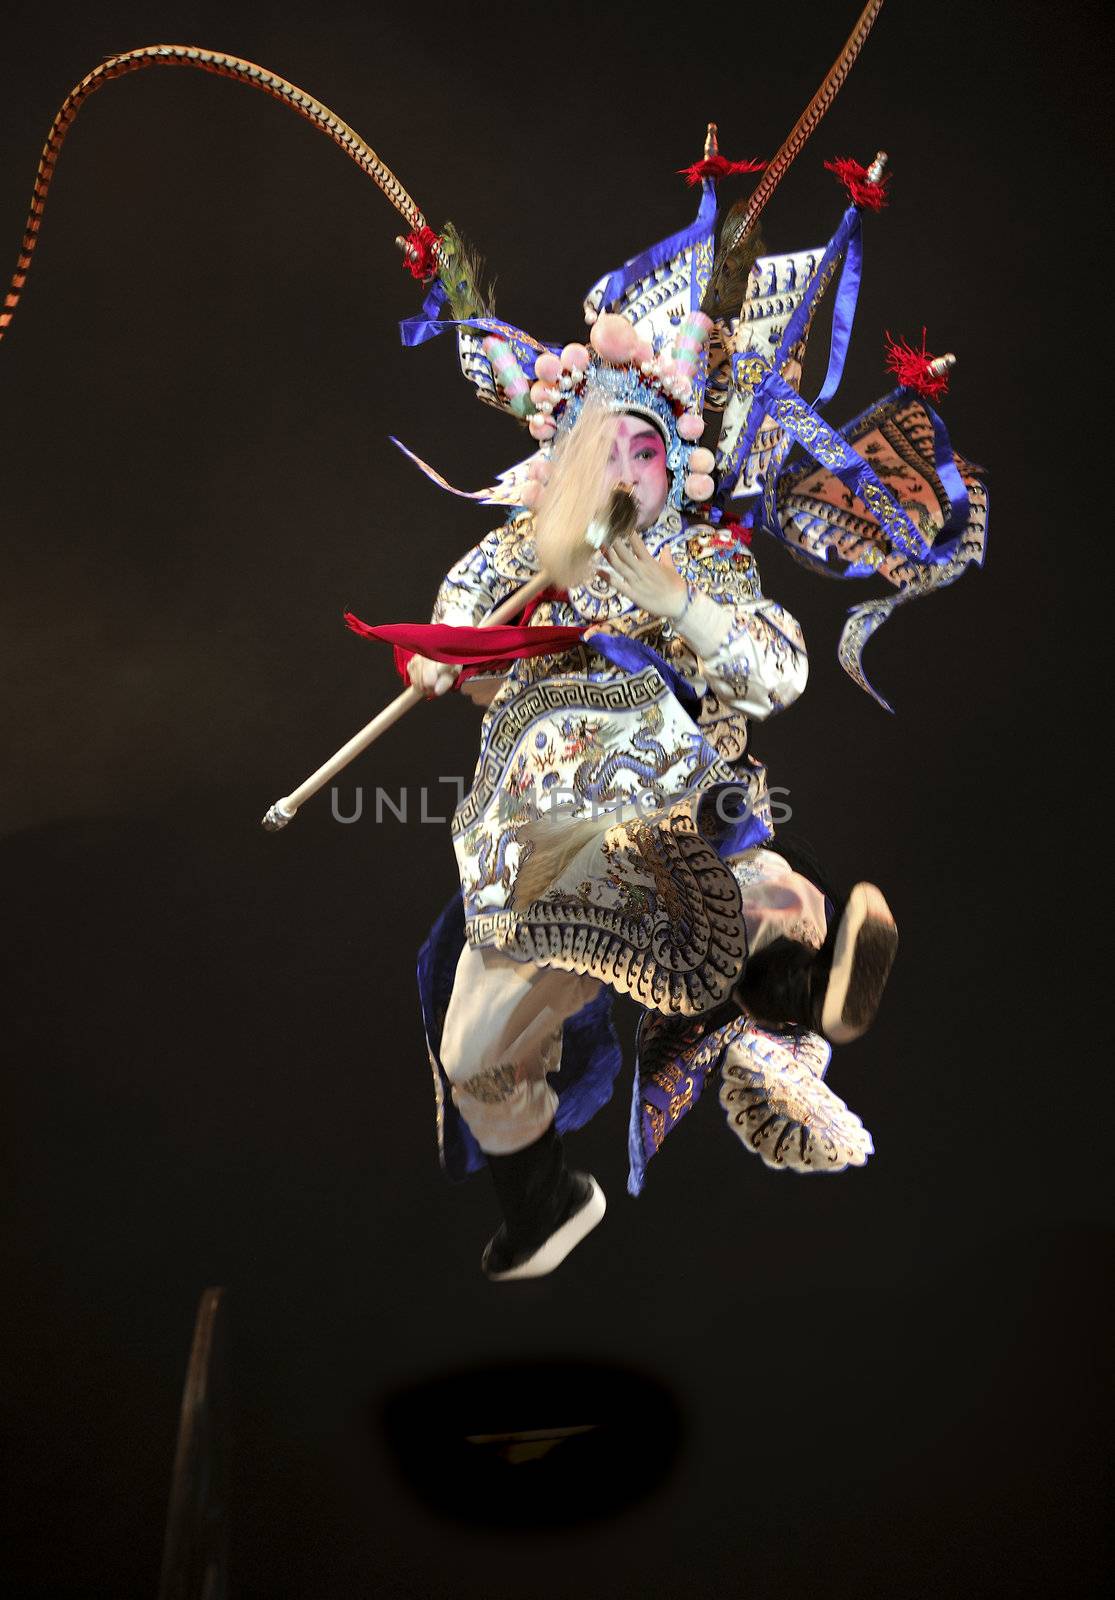 Jumping chinese opera actor with traditional costume by jackq